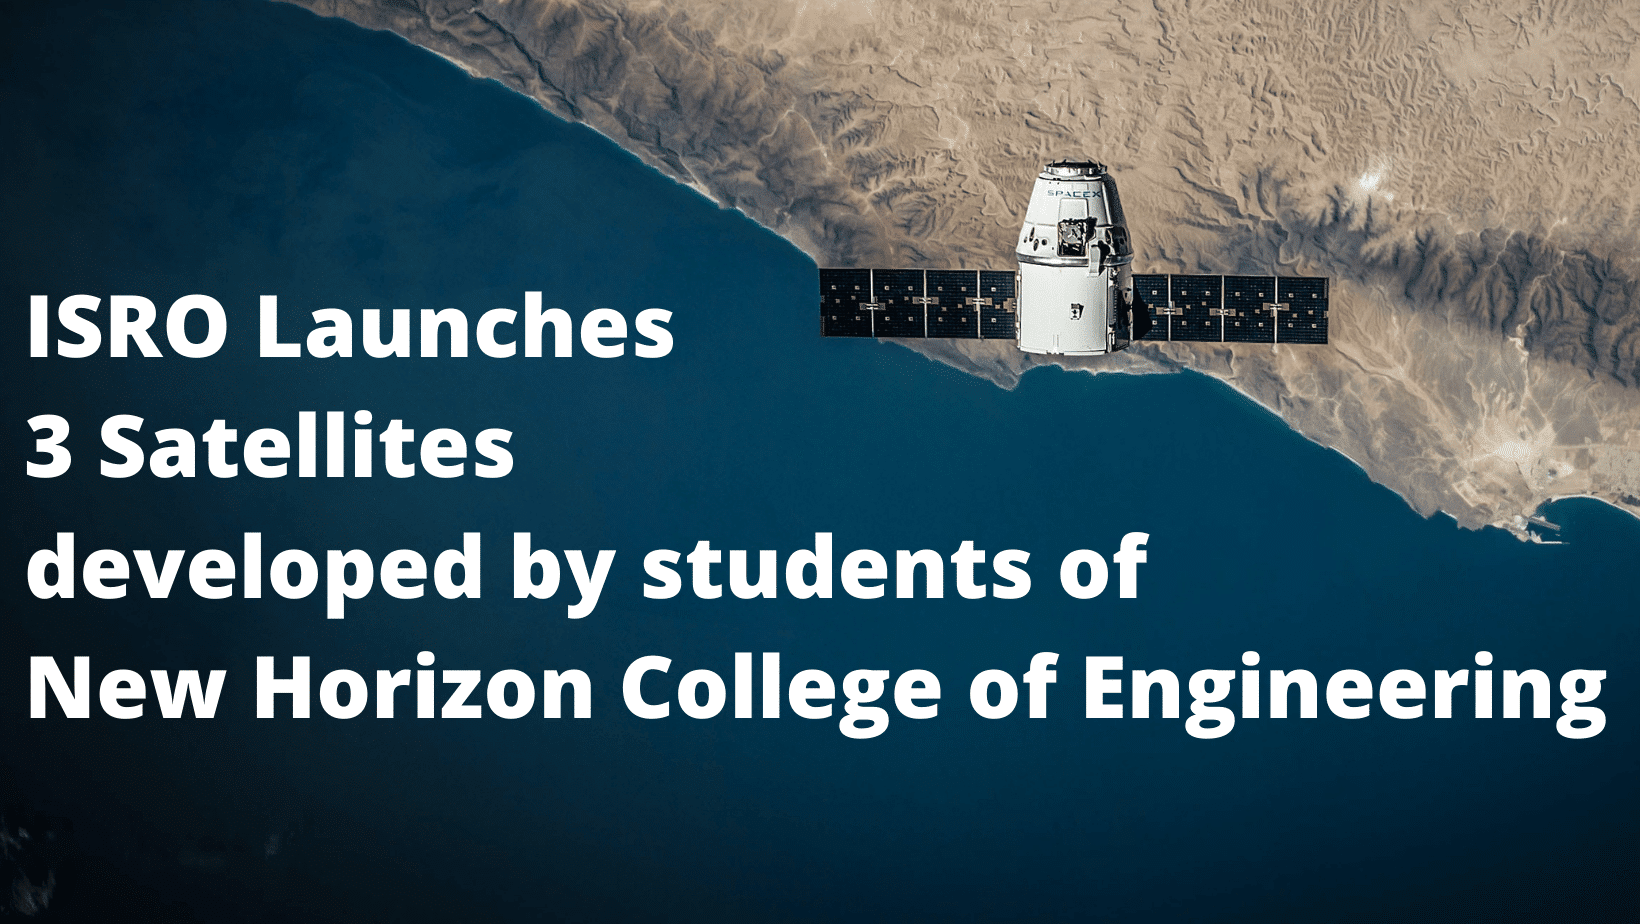 ISRO launches 3 satellites developed by students of New Horizon College of Engineering